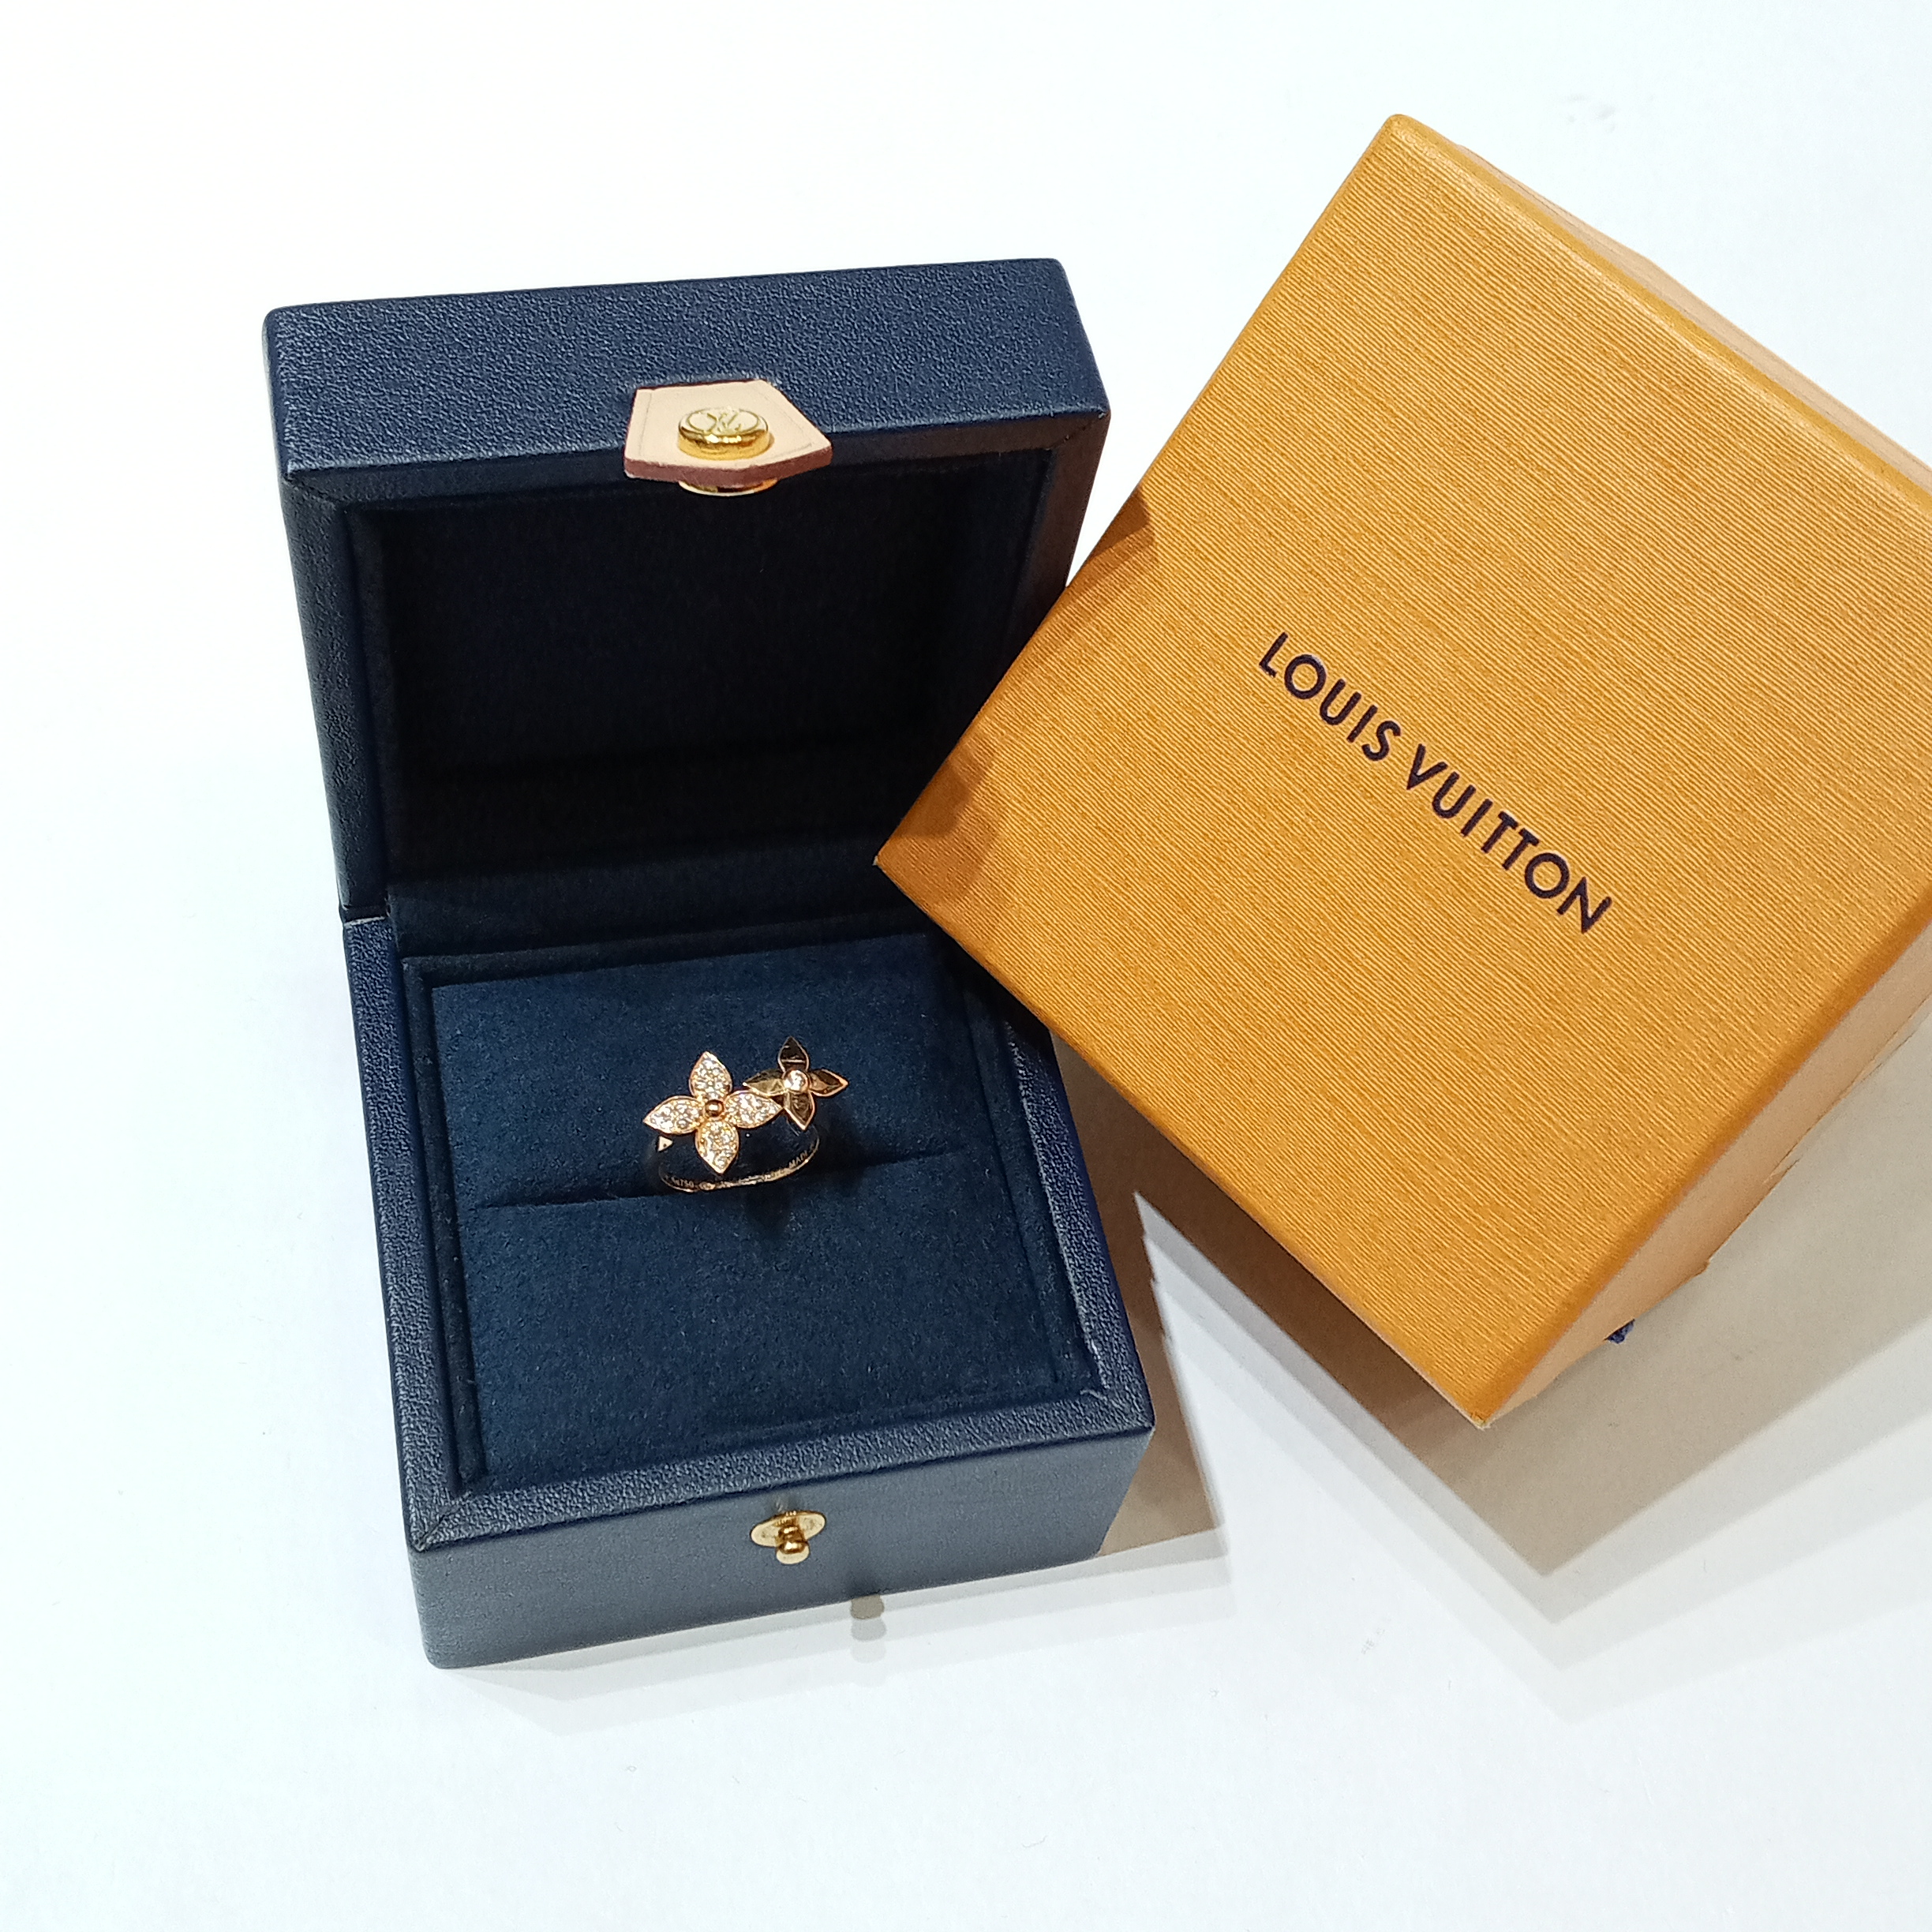 Louis Vuitton Star Blossom Ring, White Gold and Diamonds Grey. Size 52